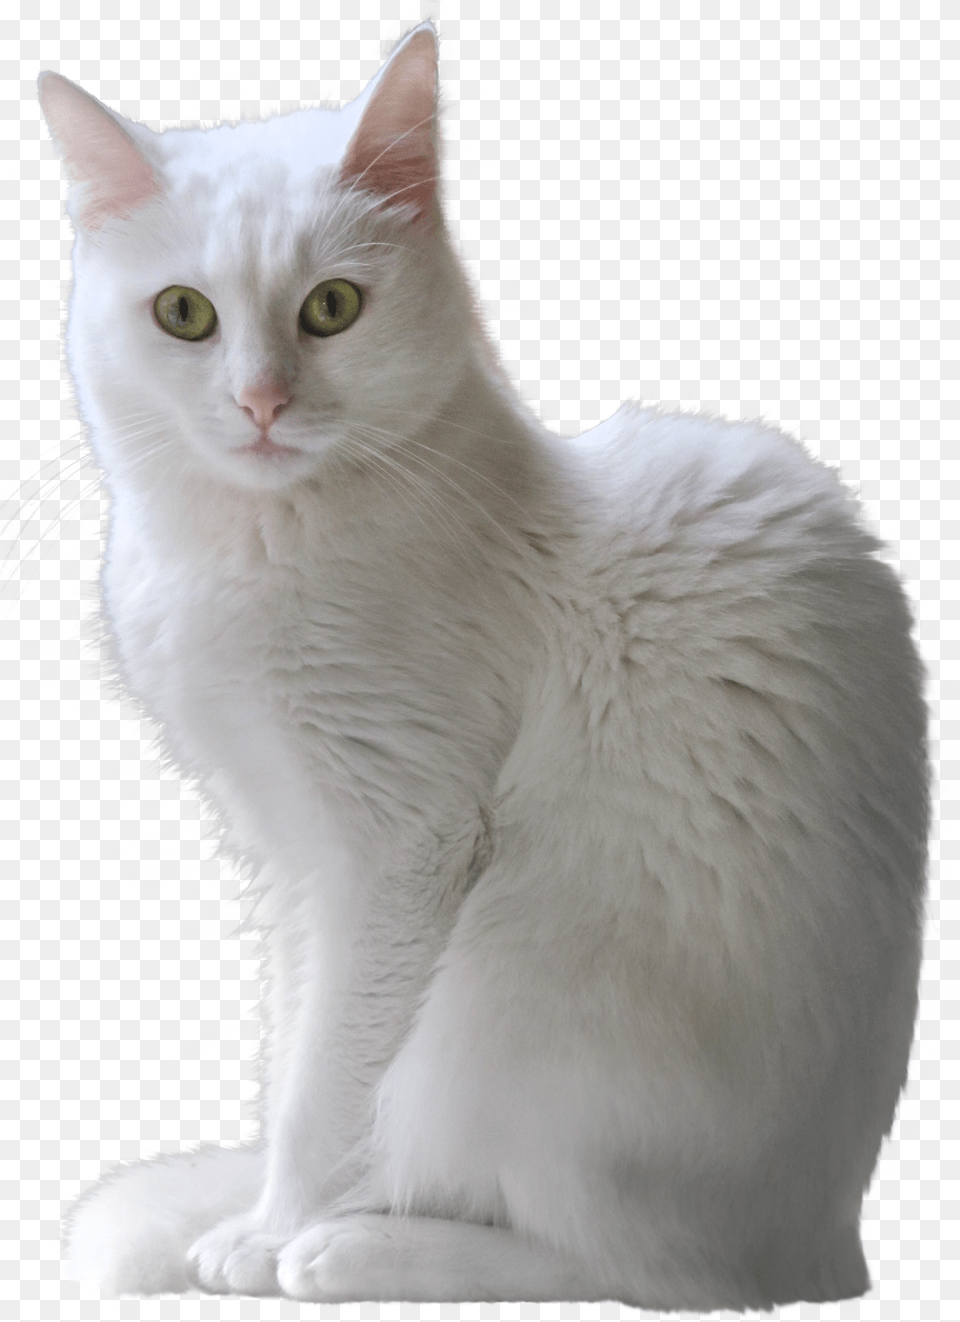 White Cat Transparent Background Transparent Background White Cat Png